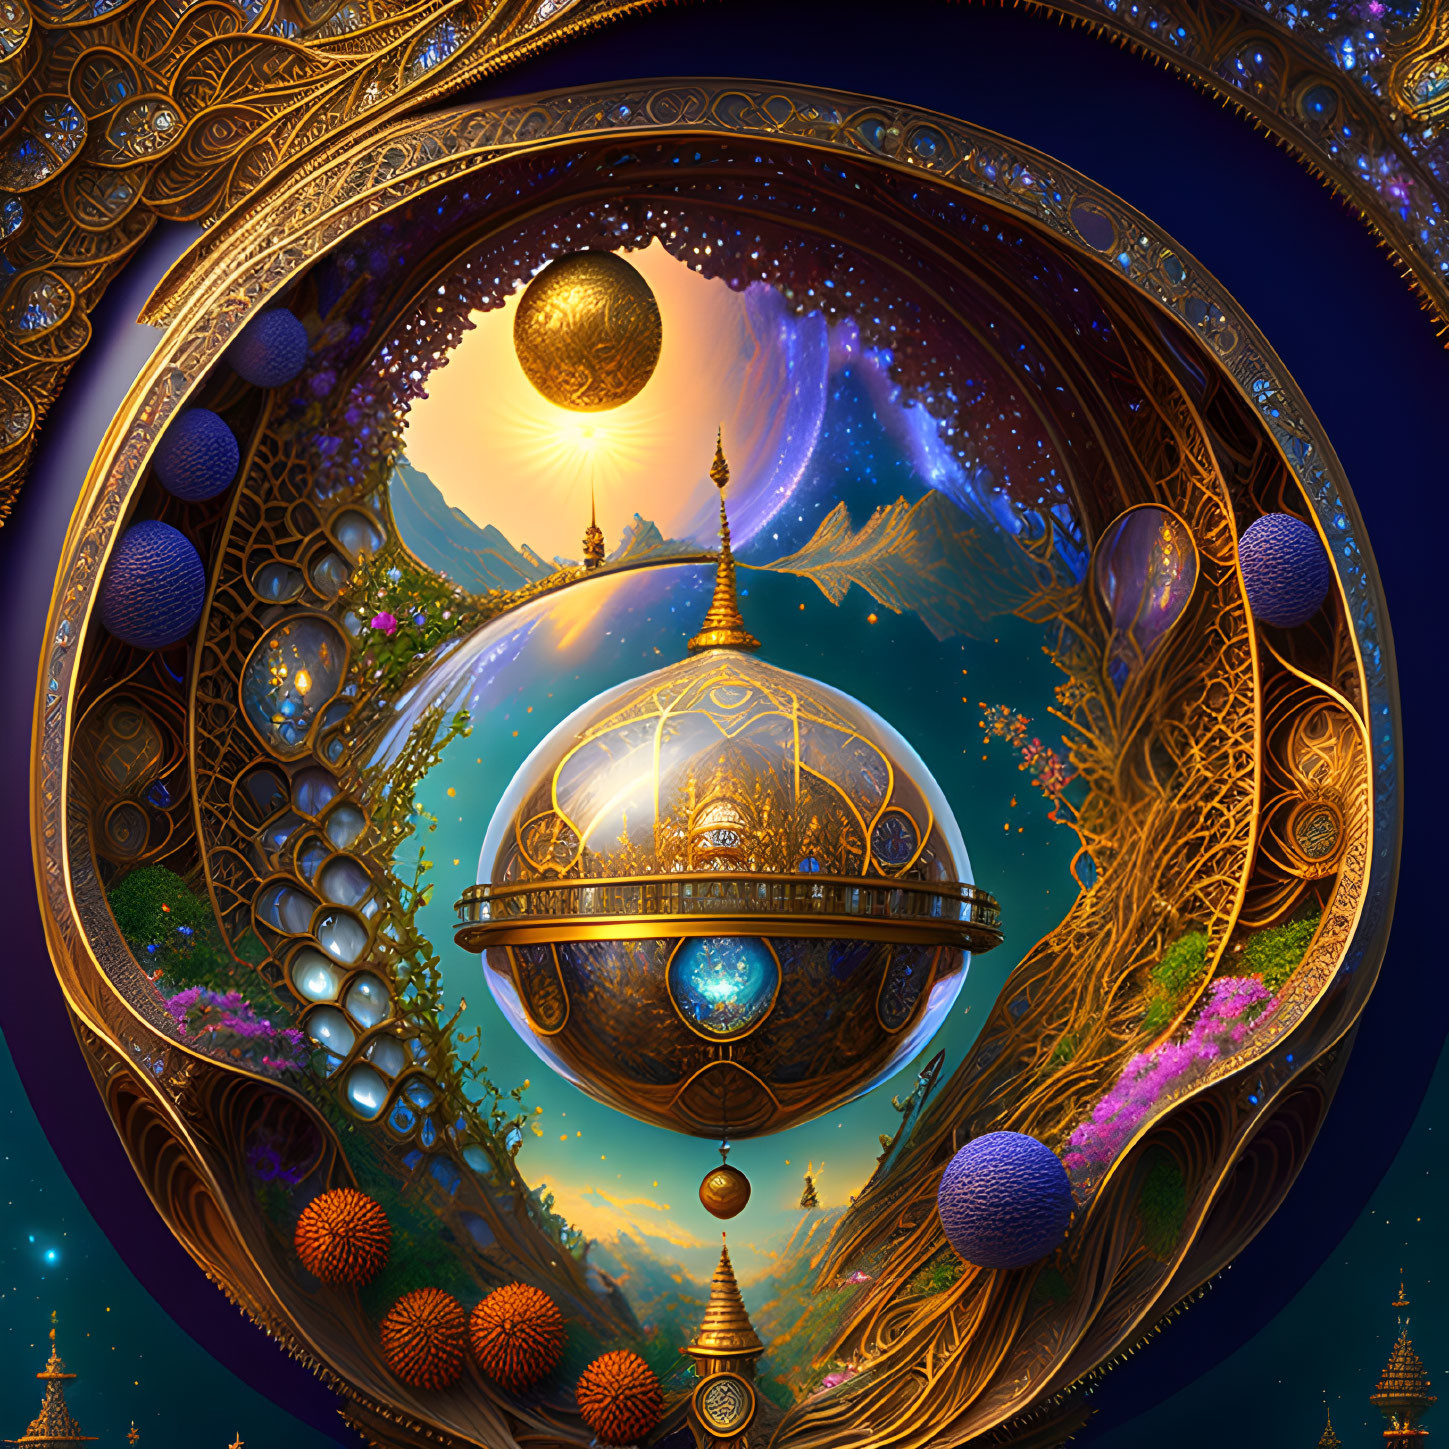 Surreal landscape fractal art with orbs, spirals, and intricate patterns